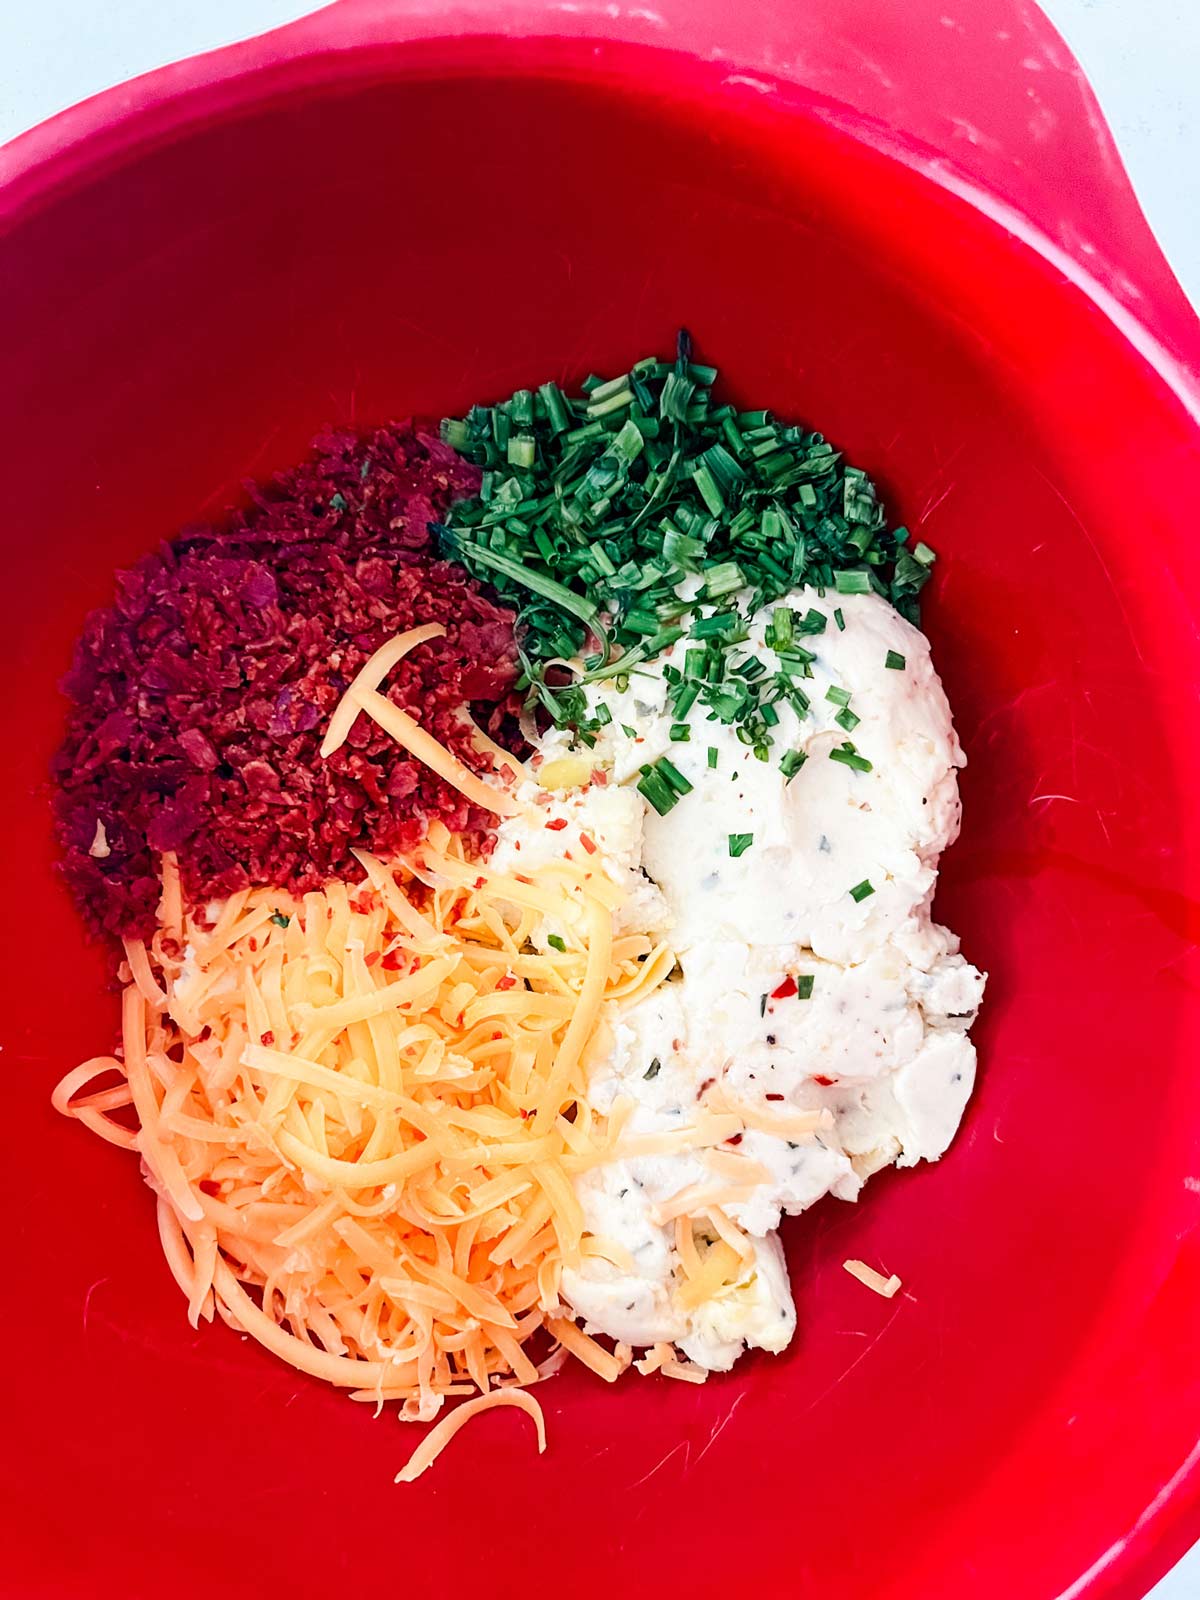 Mashed potatoes, bacaon, chives, and shredded cheese in a red bowl.